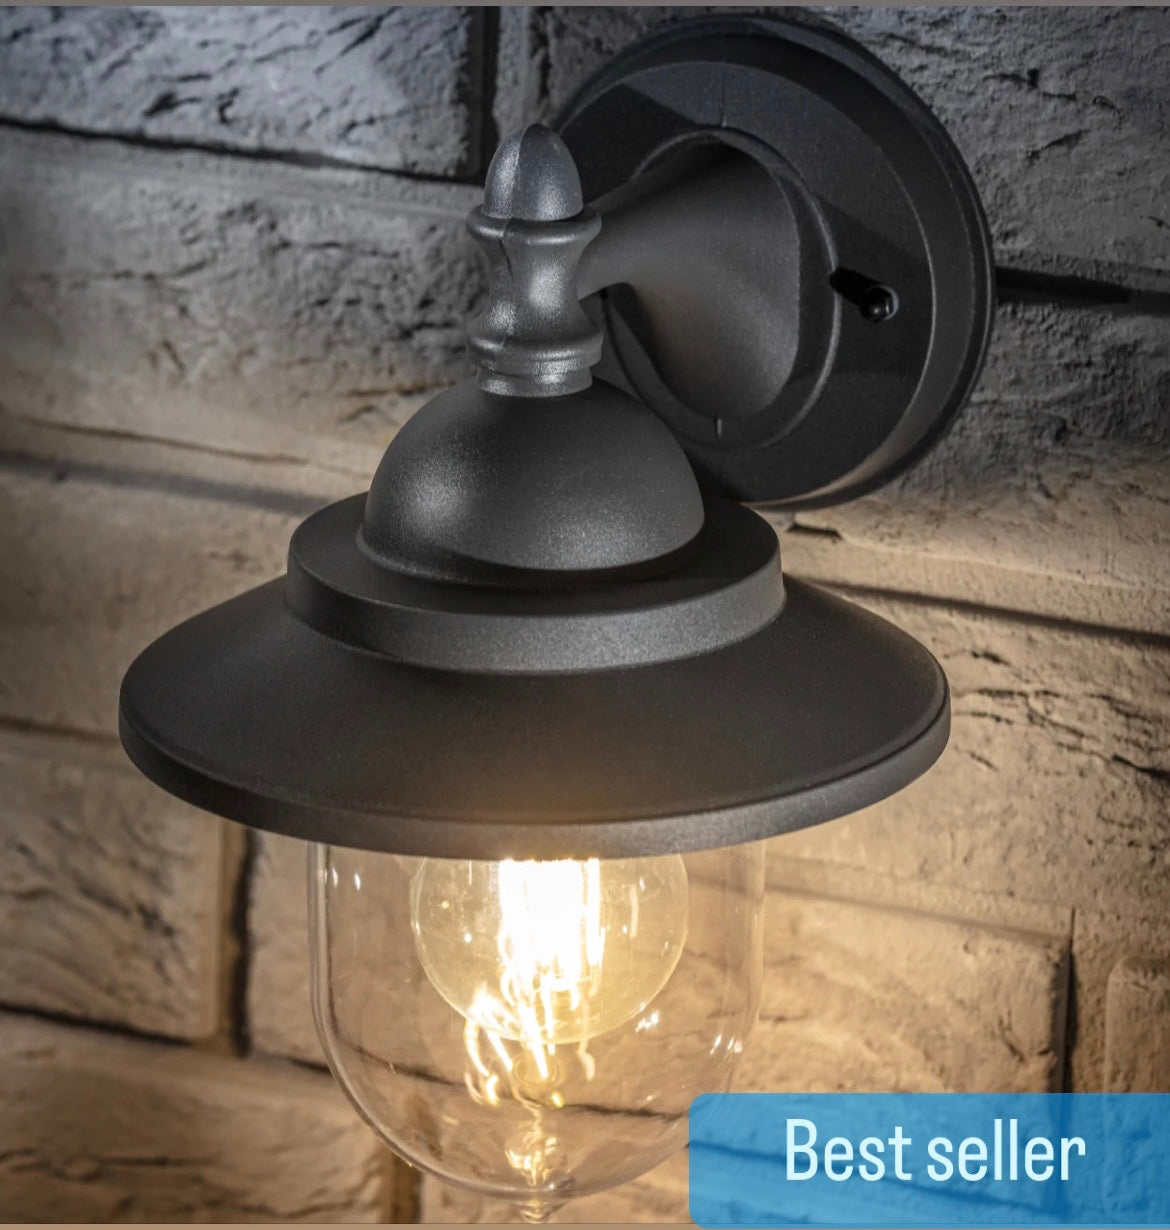 If you’re looking for a grander, more contemporary look for your home’s lighting system, take a browse through our dark grey fisherman lantern wall light. This product boasts a darker colour, making sure that the appearance blends into the sophisticated design of your home. For a simpler way to bring discrete elegance to your home, consider our dark grey RYDER fisherman lantern light. 